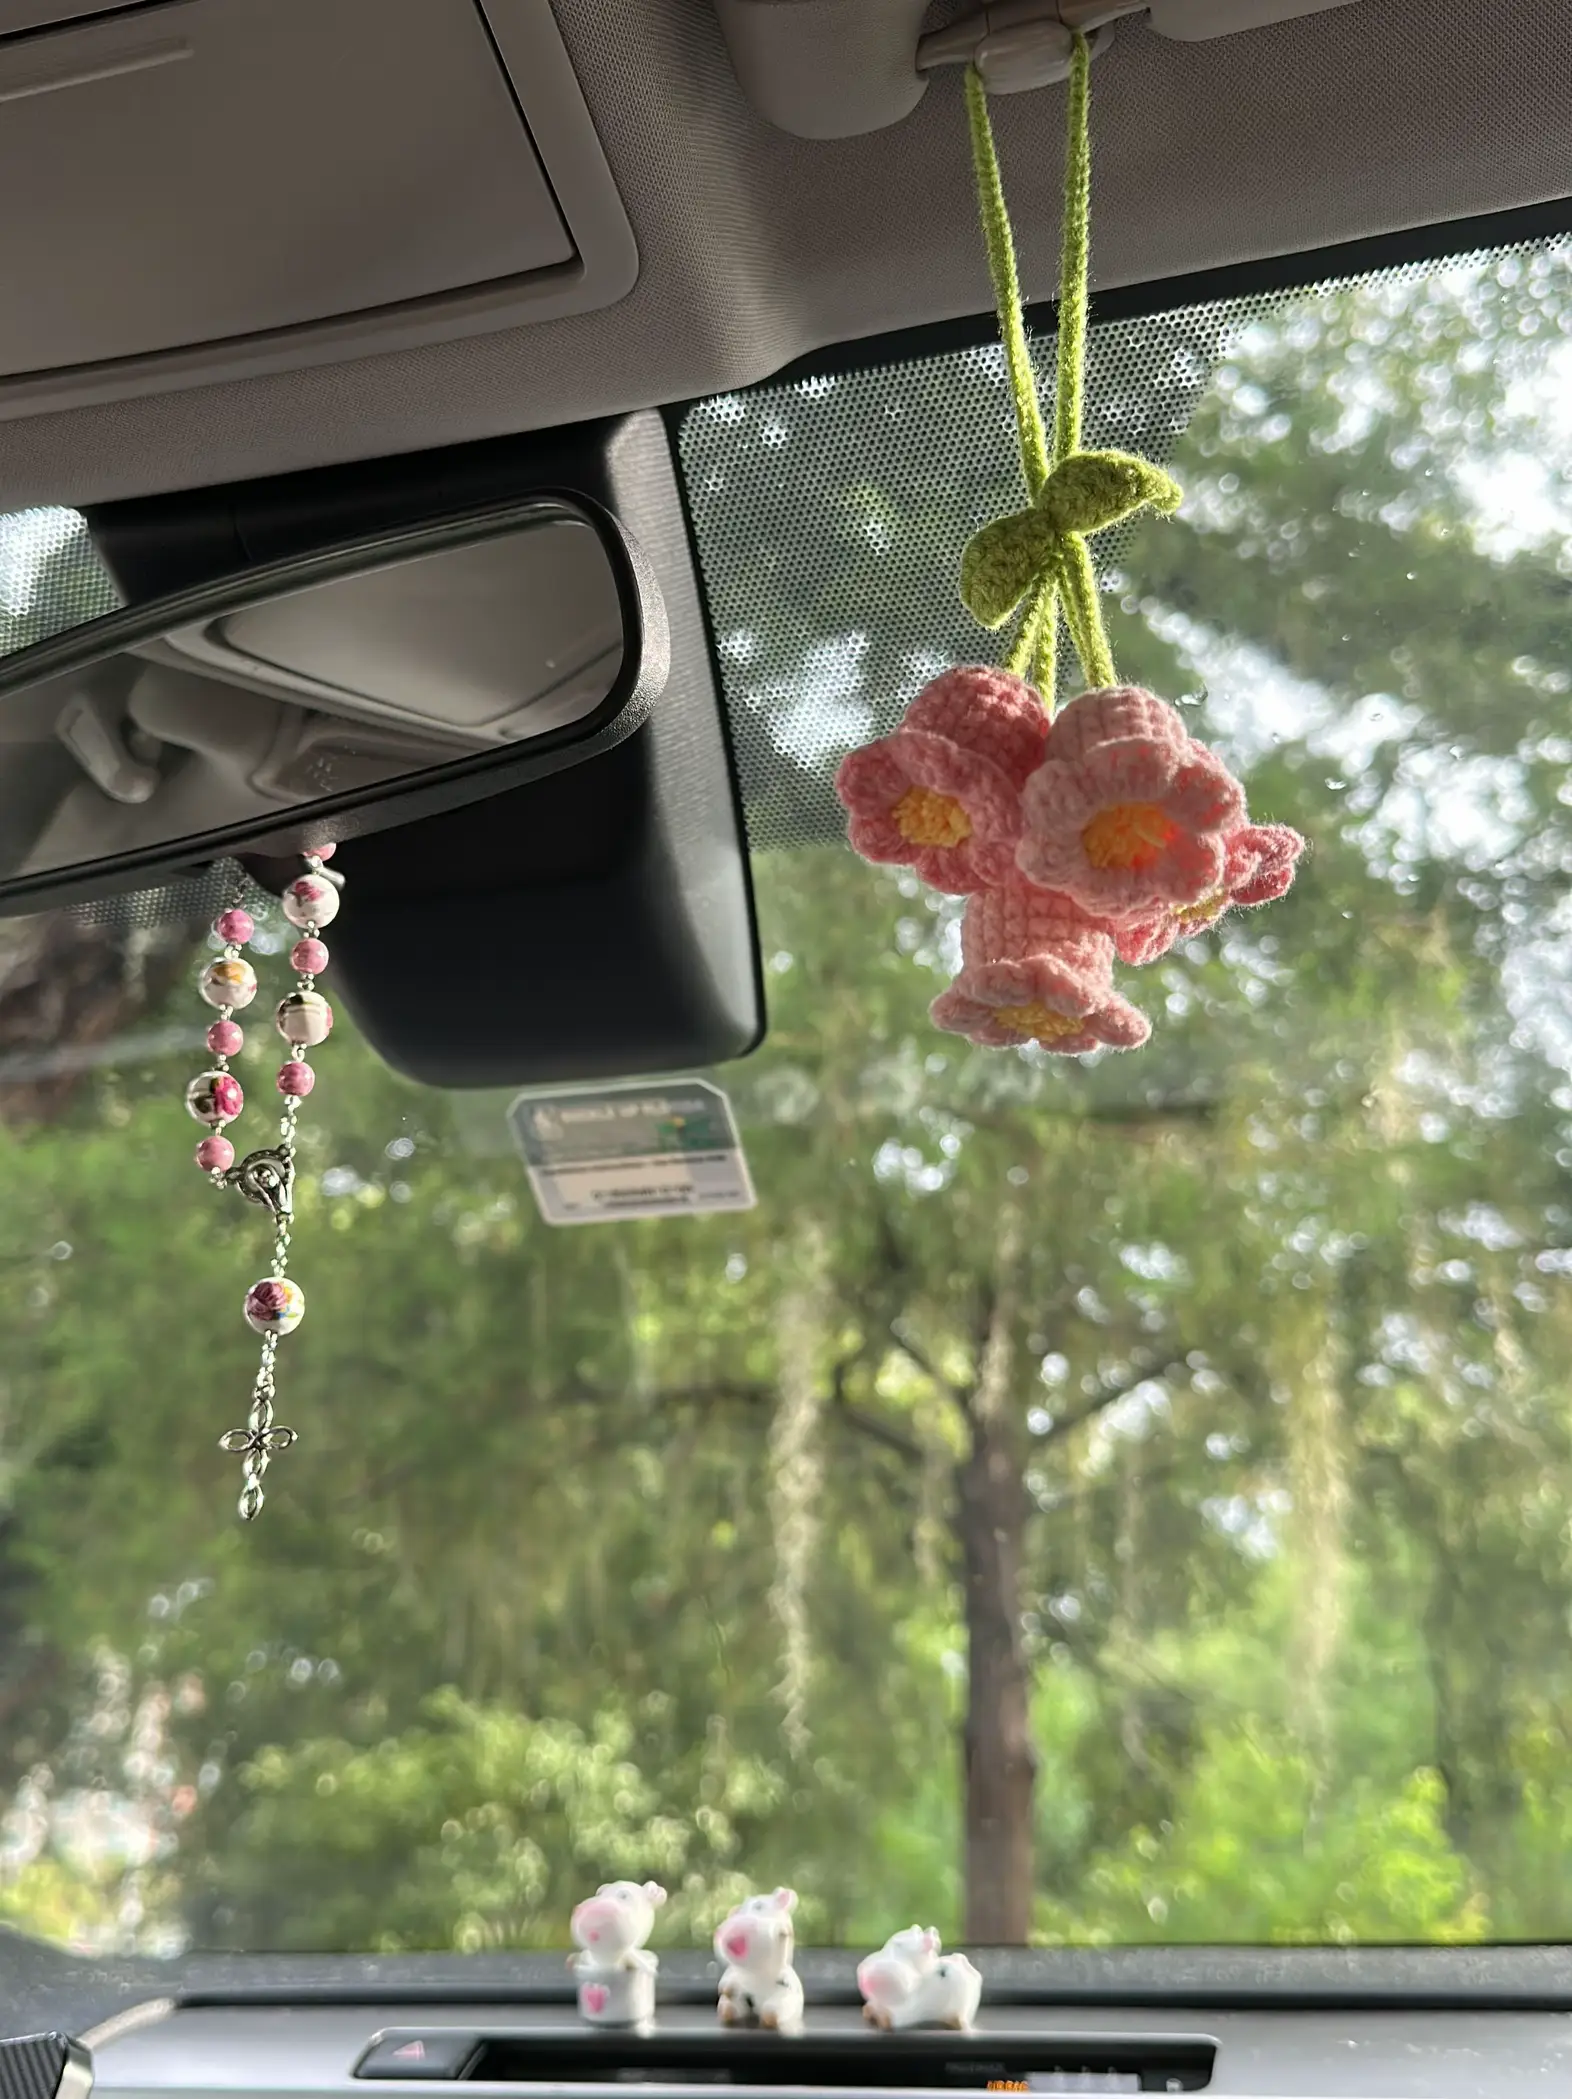 Car Aesthetic 💕🌸, Gallery posted by 乇爪丨Ҝ卂匚卄丨